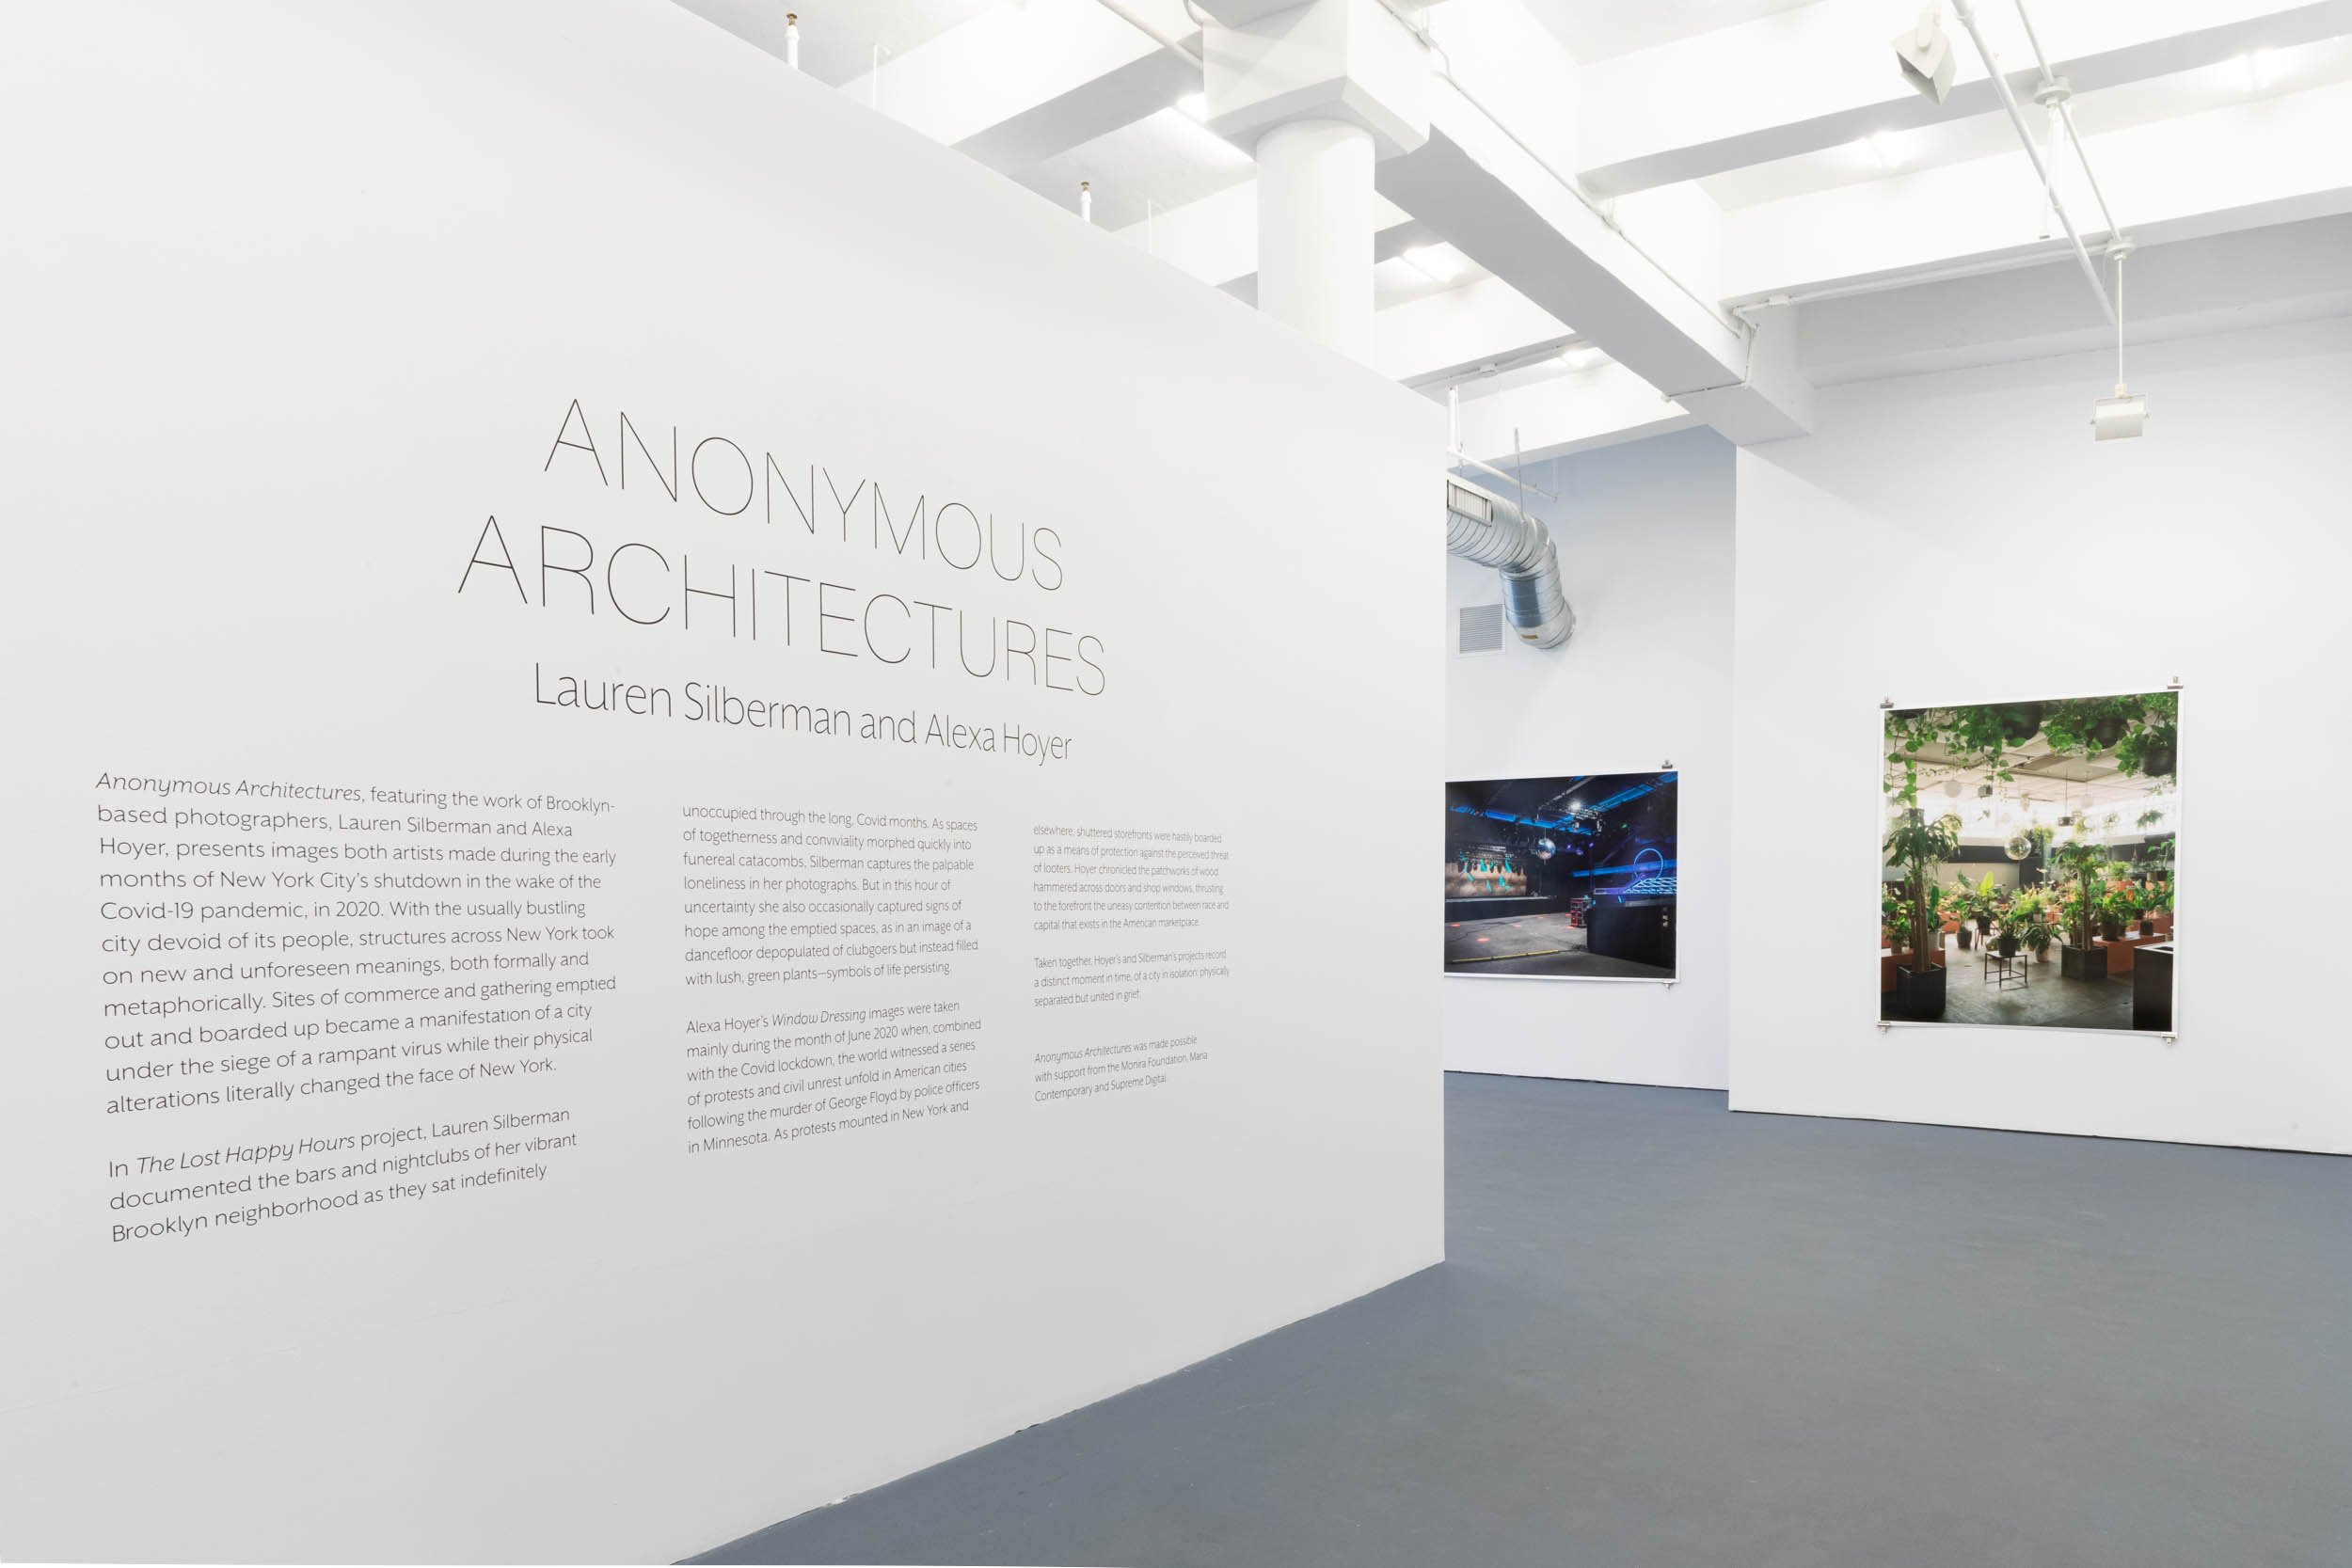 Installation shot from Anonymous Architectures